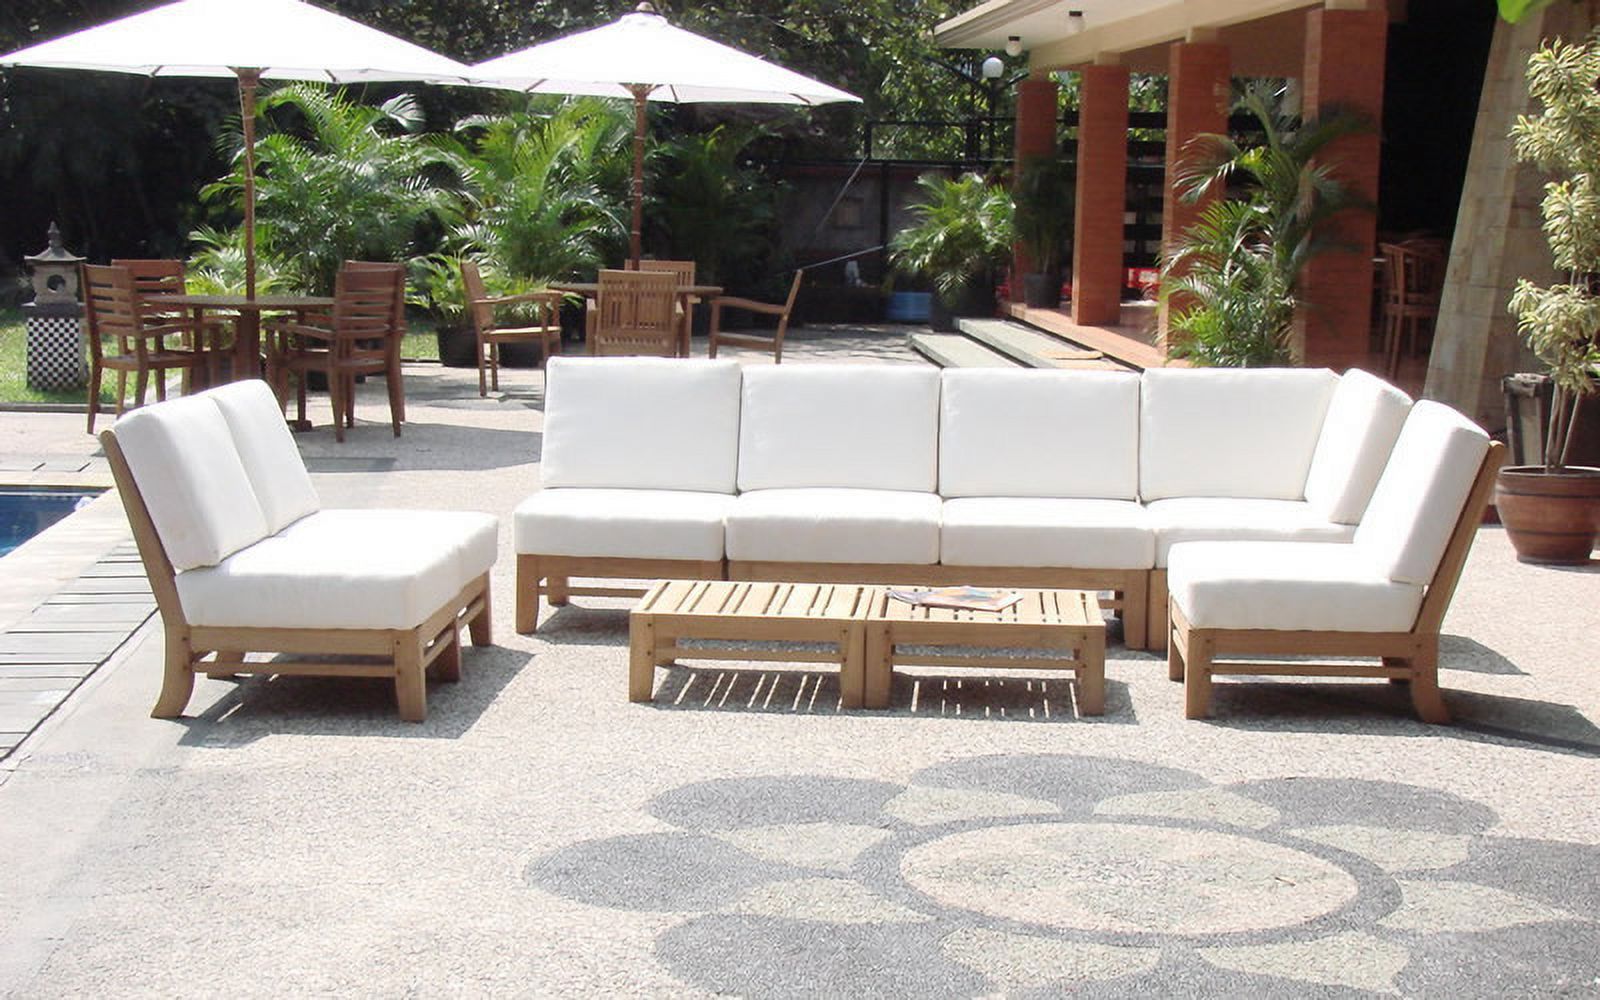 WholesaleTeak Outdoor Patio Grade-A Teak Wood 7 Piece Teak Sectional Sofa Set - 2 Love Seats, 2 Lounge Chair, 1 Corner Pc, 1 Ottoman & 1 Side Table - Furniture only -- Ramled collection #WMSSRM1 - image 3 of 5